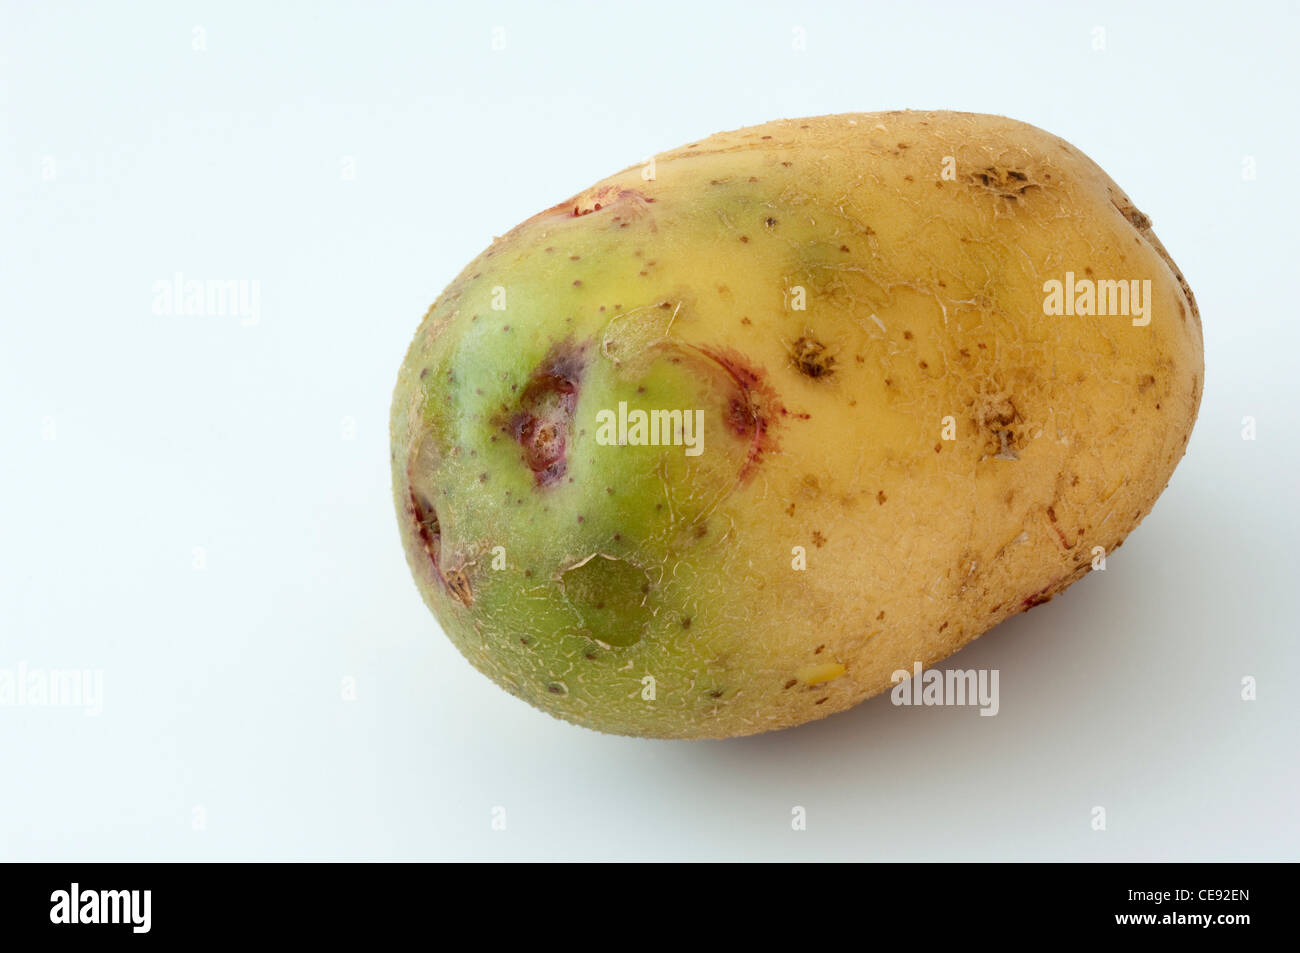 Potato (Solanum tuberosum), variety: Quarta. Tubers, one of them with green sections due to exposure to light Stock Photo